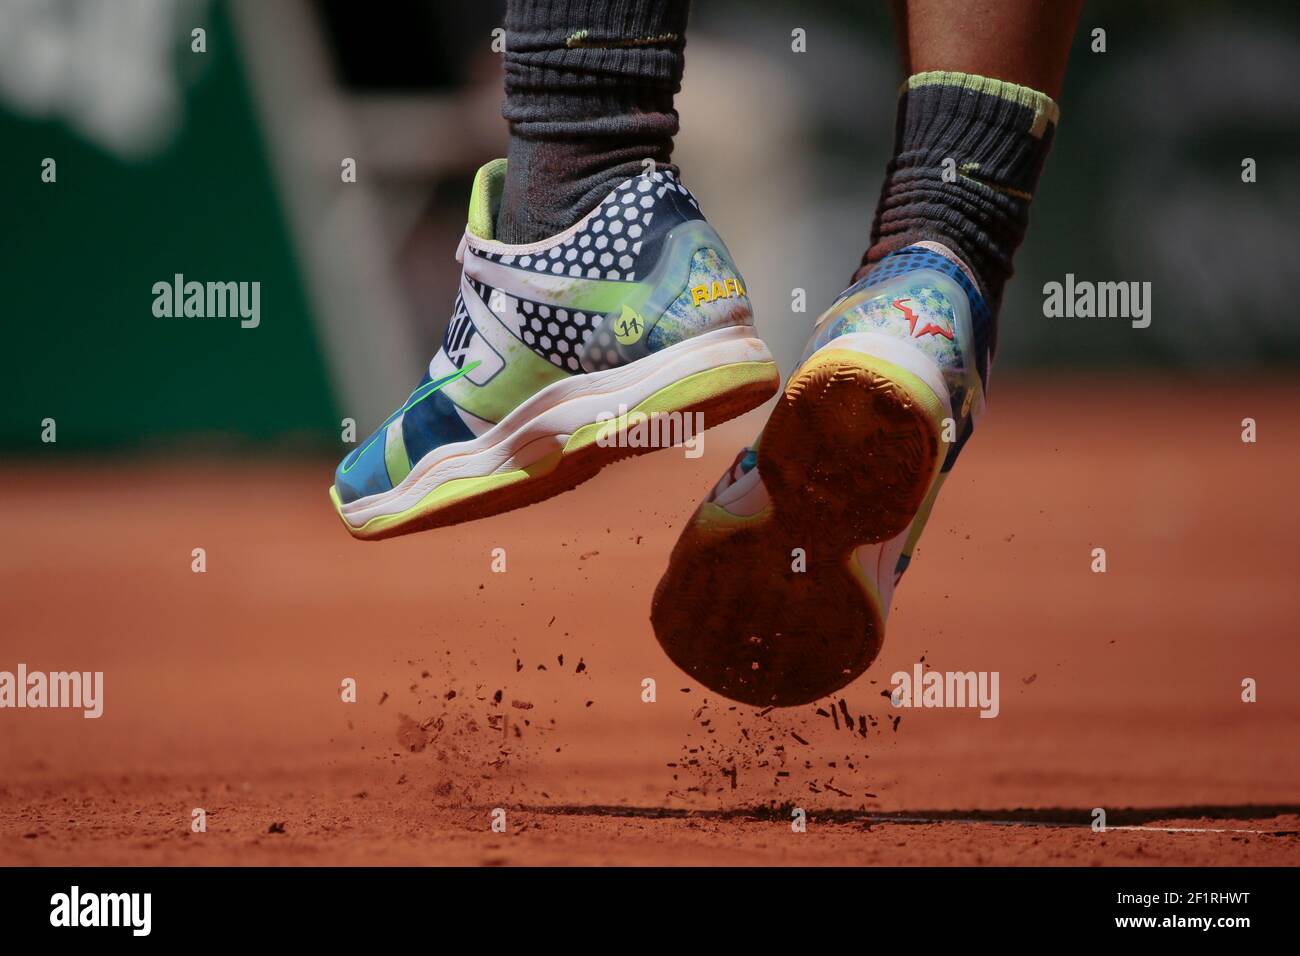 Rafael Nadal Nike High Resolution Stock Photography and Images - Alamy